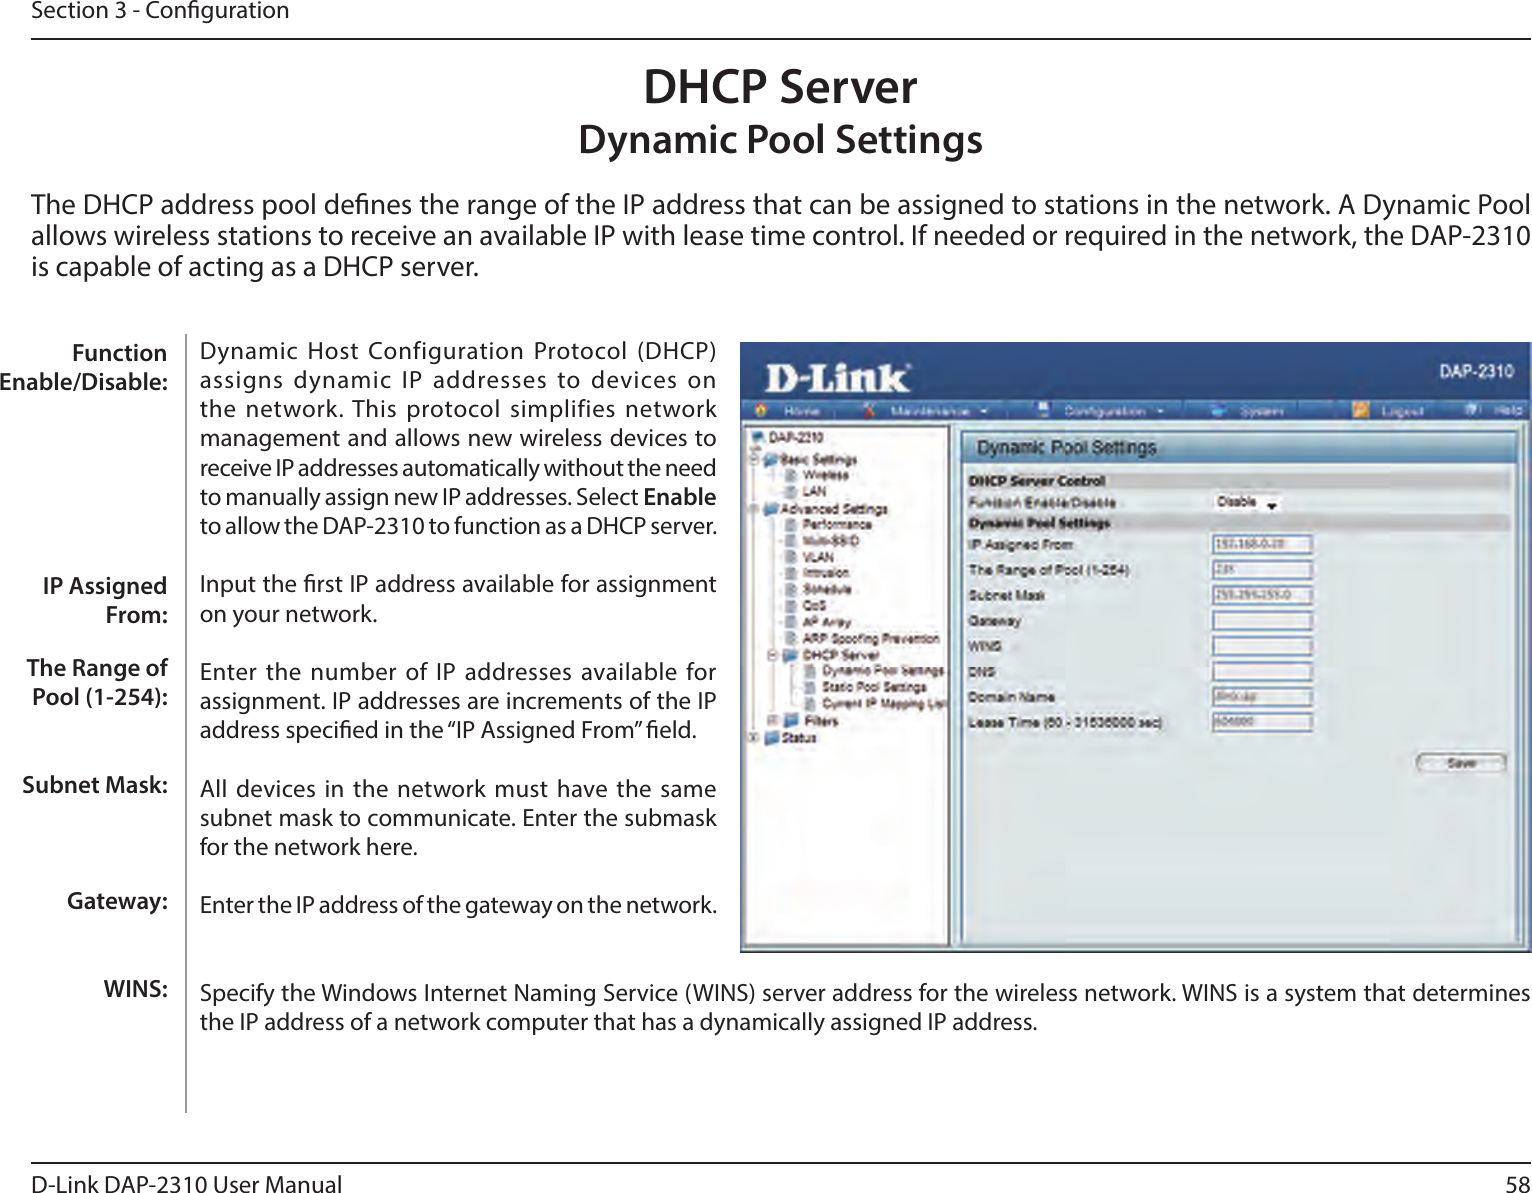 58D-Link DAP-2310 User ManualSection 3 - CongurationDHCP Server Dynamic Pool SettingsThe DHCP address pool denes the range of the IP address that can be assigned to stations in the network. A Dynamic Pool allows wireless stations to receive an available IP with lease time control. If needed or required in the network, the DAP-2310 is capable of acting as a DHCP server.Dynamic  Host Configuration Protocol (DHCP) assigns dynamic  IP addresses to devices on the network. This protocol simplifies  network management and allows new wireless devices to receive IP addresses automatically without the need to manually assign new IP addresses. Select Enable to allow the DAP-2310 to function as a DHCP server.Input the rst IP address available for assignment on your network.Enter the number of IP  addresses available for assignment. IP addresses are increments of the IP address specied in the “IP Assigned From” eld.All devices  in the network must have the  same subnet mask to communicate. Enter the submask for the network here.Enter the IP address of the gateway on the network.Specify the Windows Internet Naming Service (WINS) server address for the wireless network. WINS is a system that determines the IP address of a network computer that has a dynamically assigned IP address.Function Enable/Disable:IP Assigned From:The Range of Pool (1-254):Subnet Mask:Gateway:WINS: